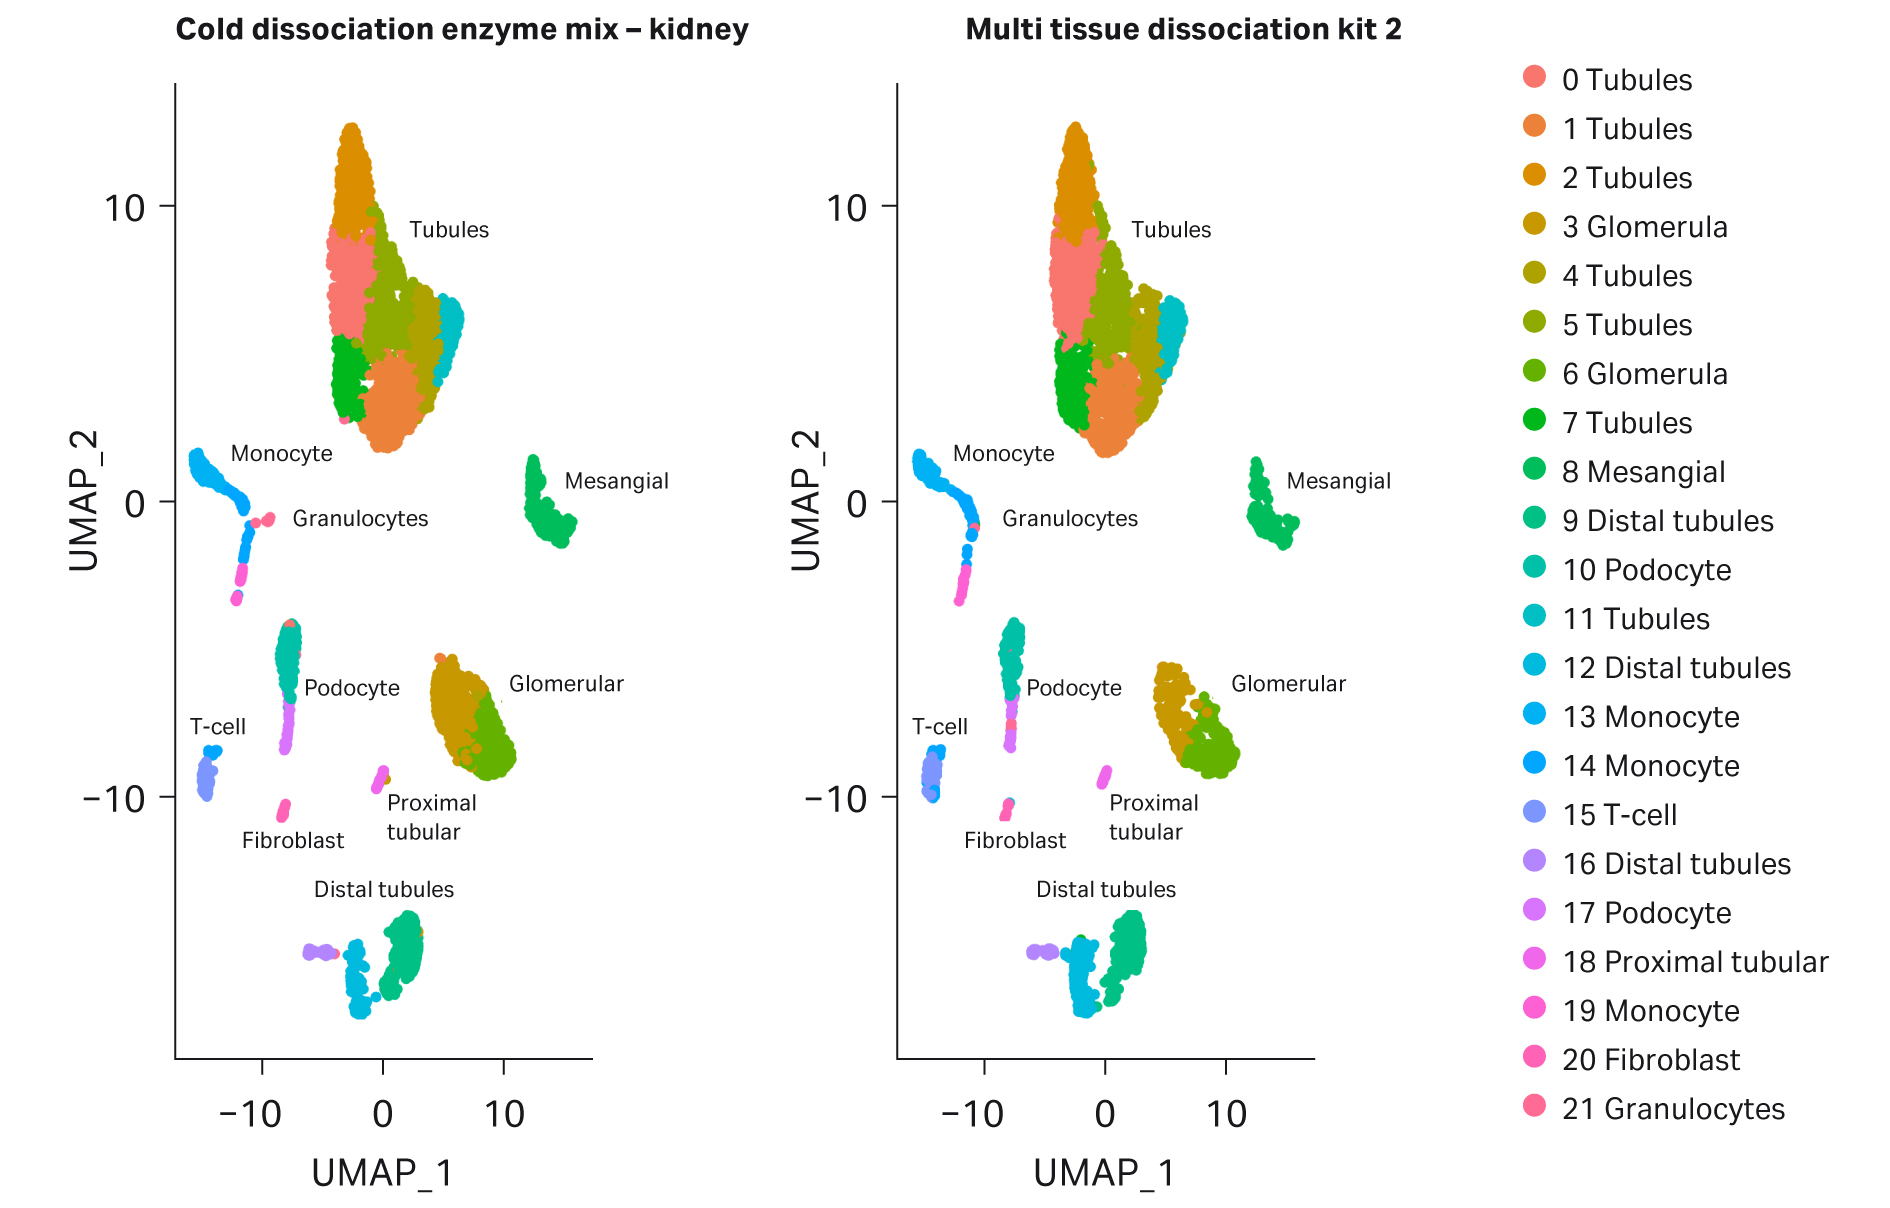 UMAP plots comparing kidney cells dissociated with Cytiva's Cold dissociation enzyme mix – kidney and Miltenyi Biotec's Multi Tissue Dissociation Kit 2